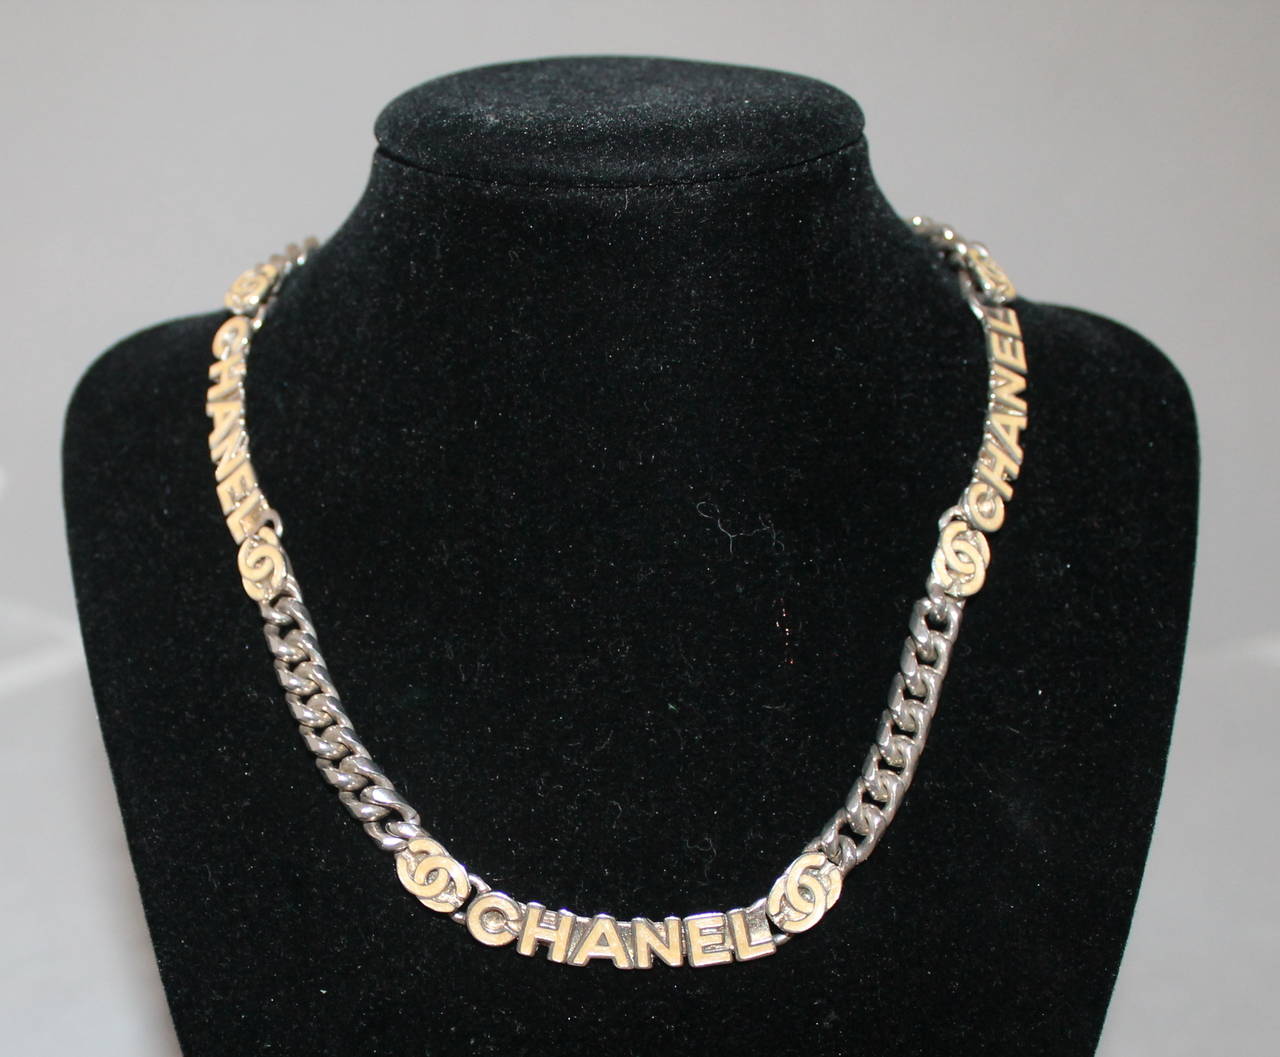 Chanel Silver & Cream Enamel Chain Necklace - circa 2000. This necklace is in excellent condition. 

Length- 16.5